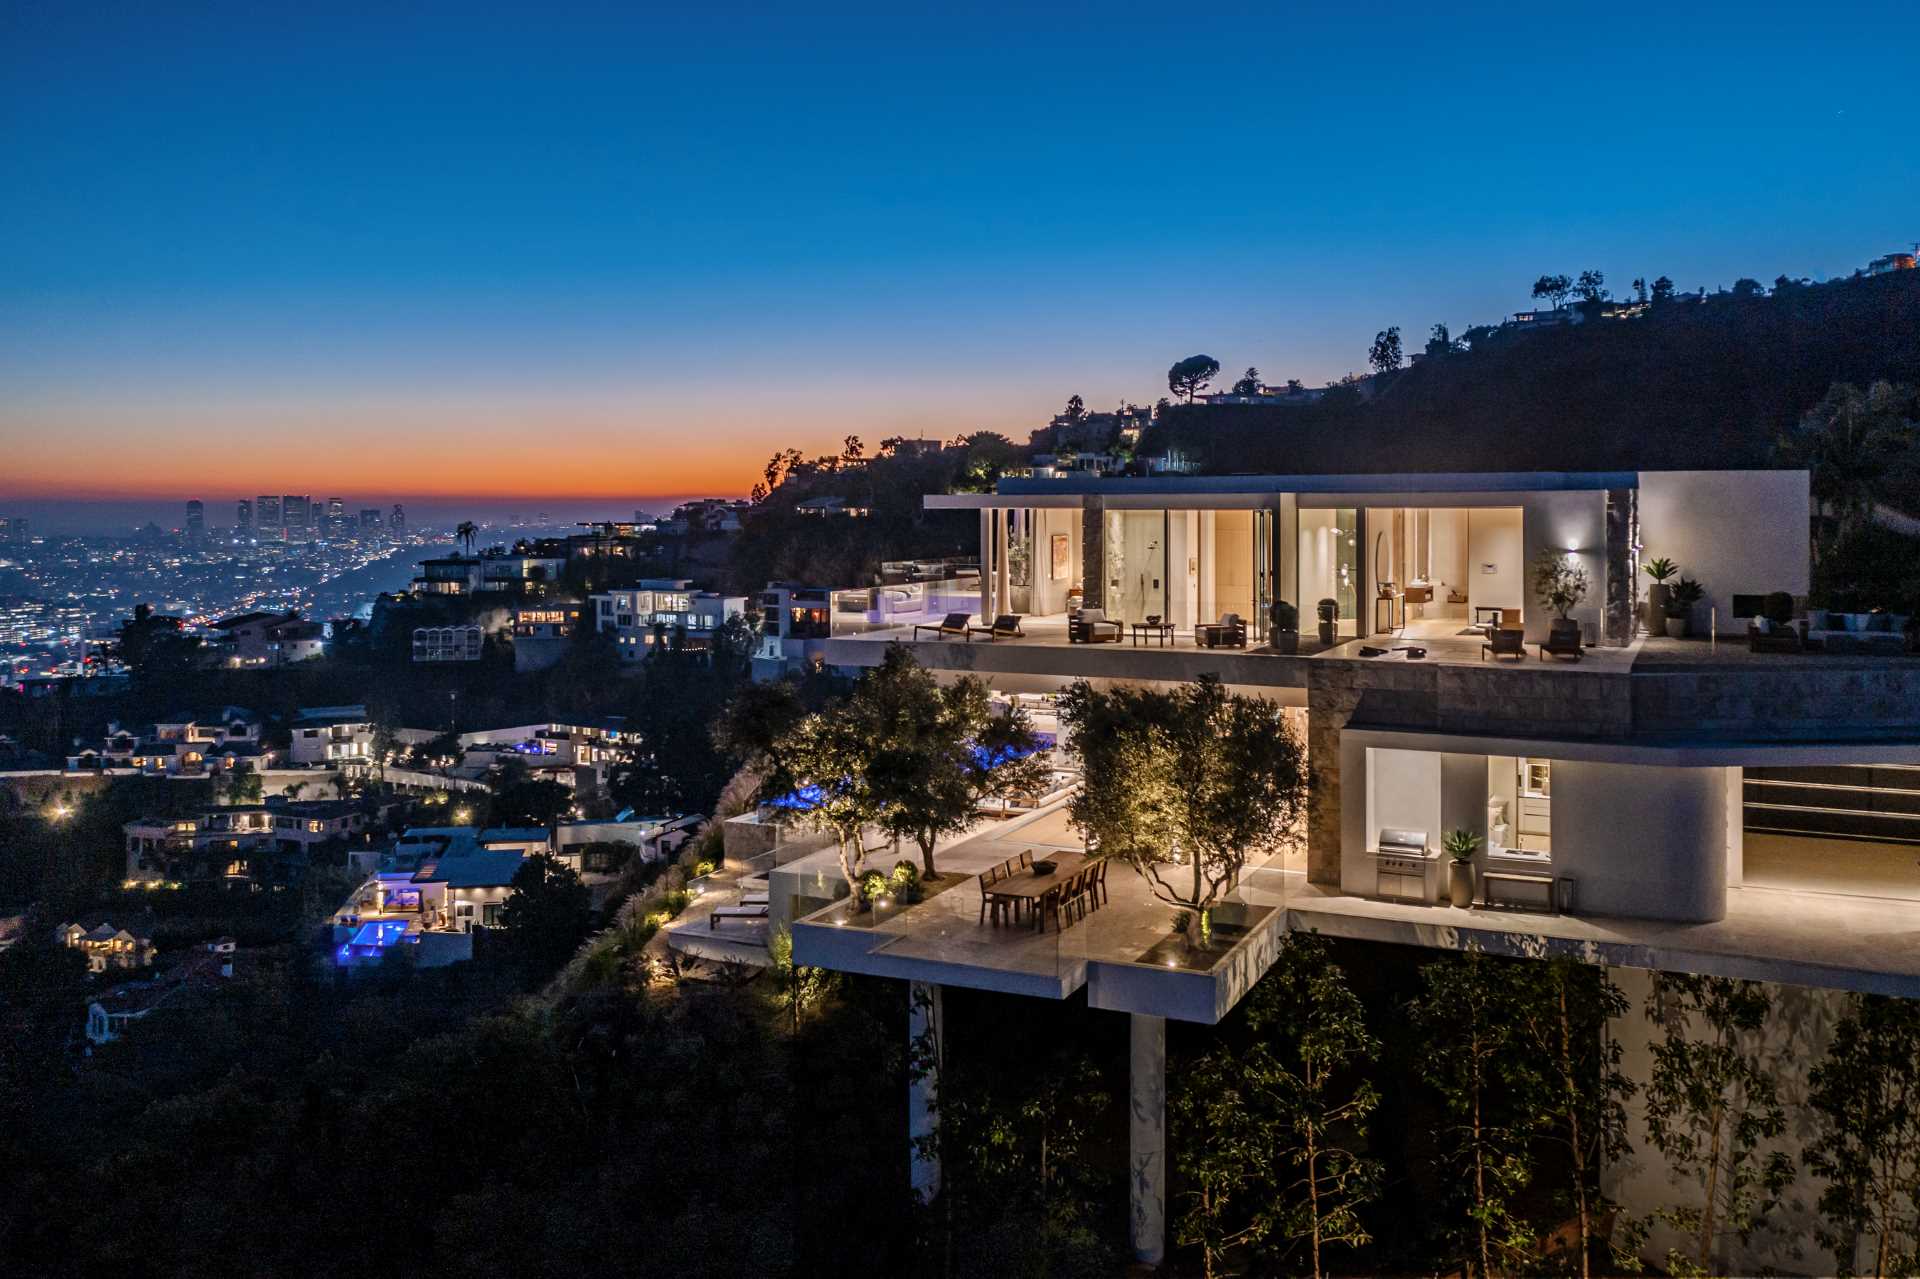 Perched high above Laurel Canyon Boulevard in the Hollywood Hills, this modern multi-storey house has views that extend all the way from Los Angeles to Santa Monica.